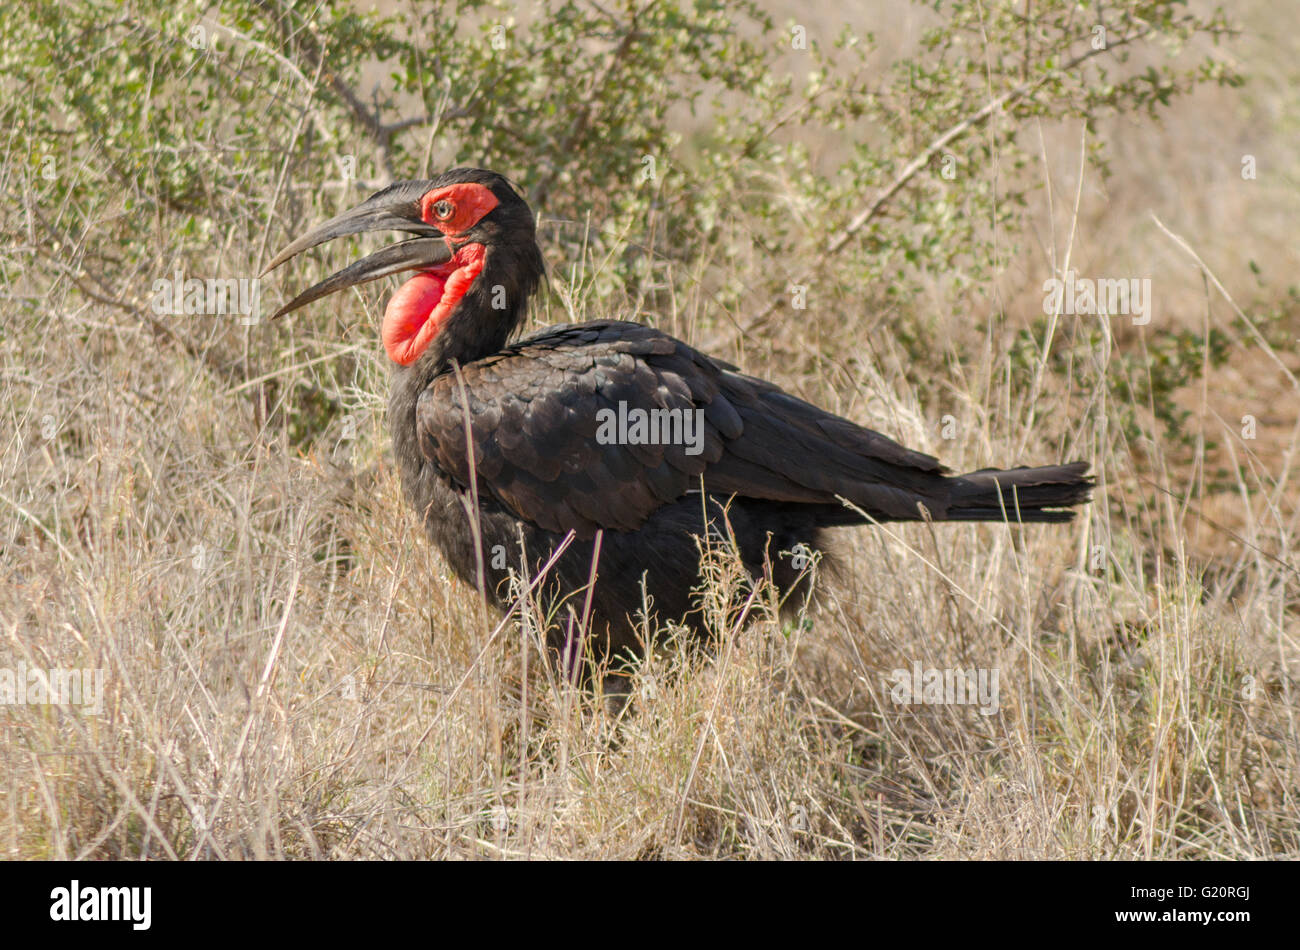 Southern ground hornbill in the Kruger National Park Stock Photo